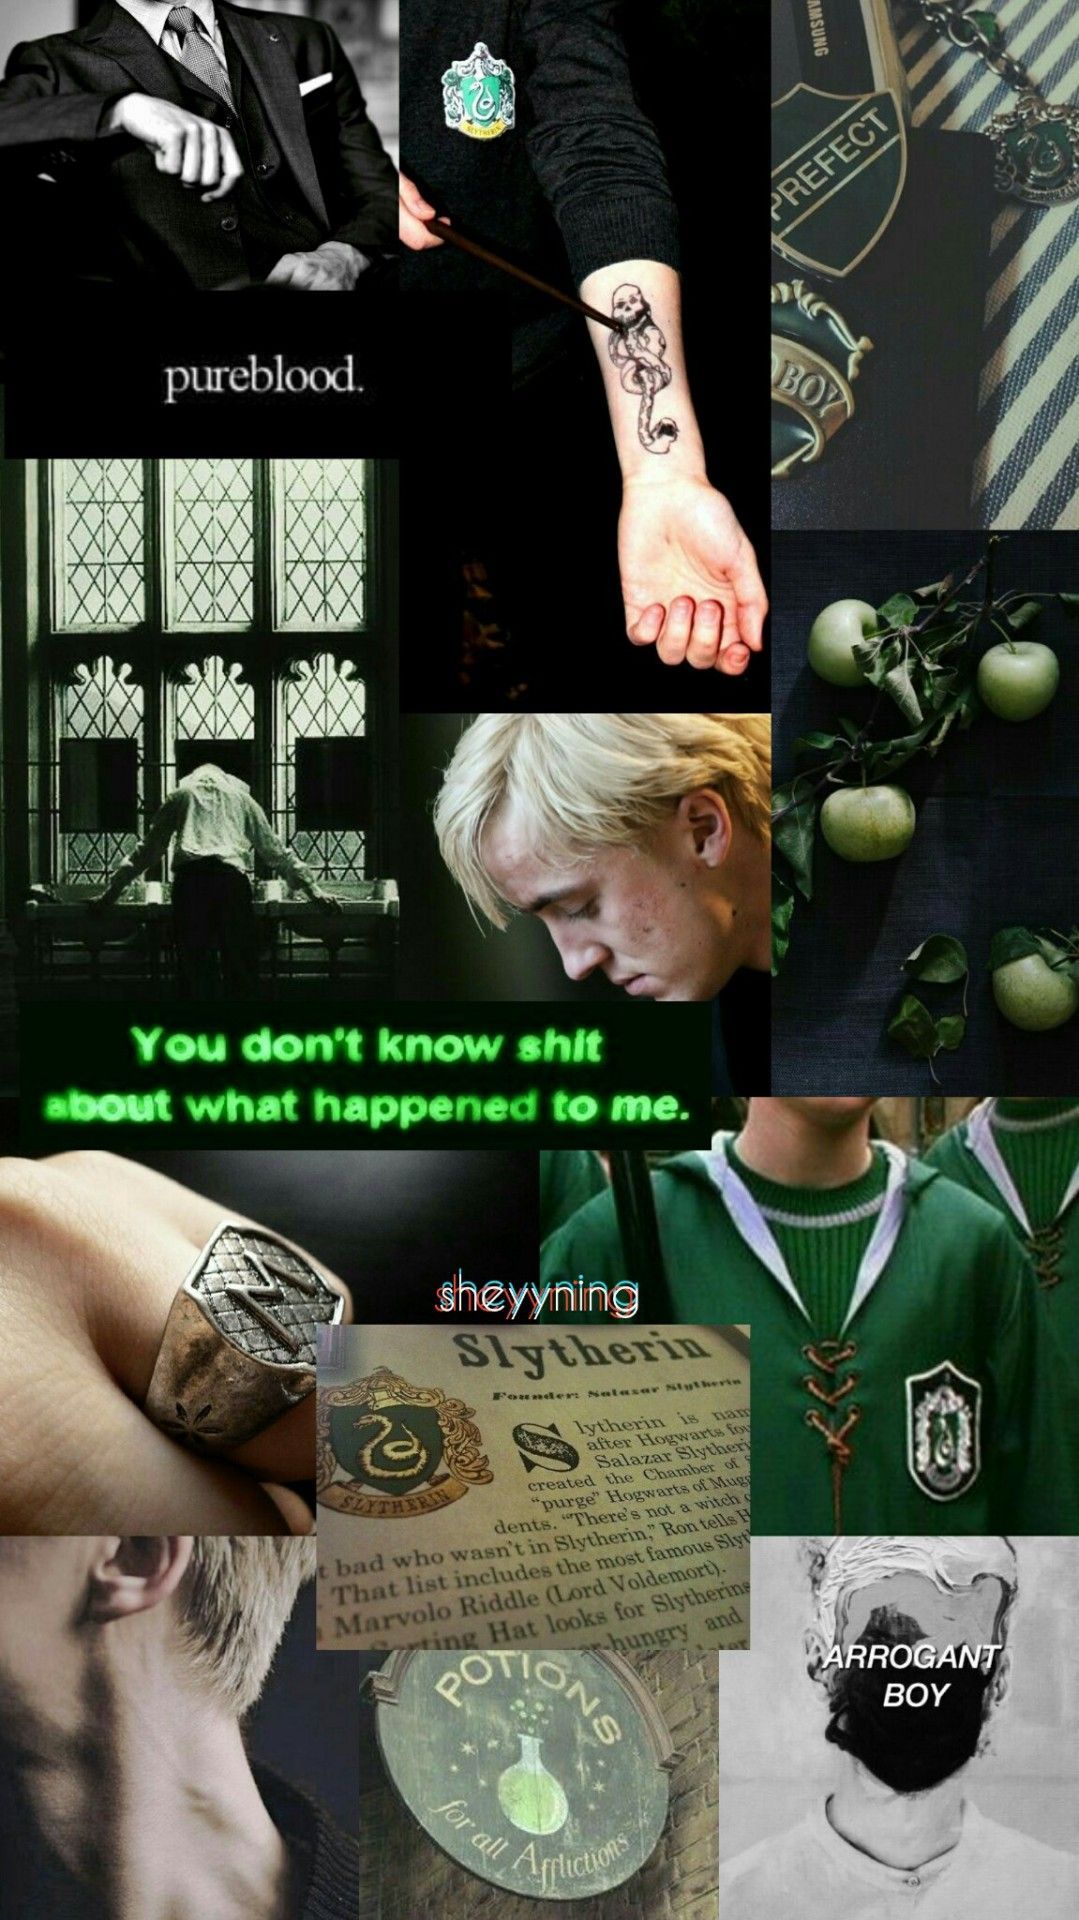 Malfoy will hear about this